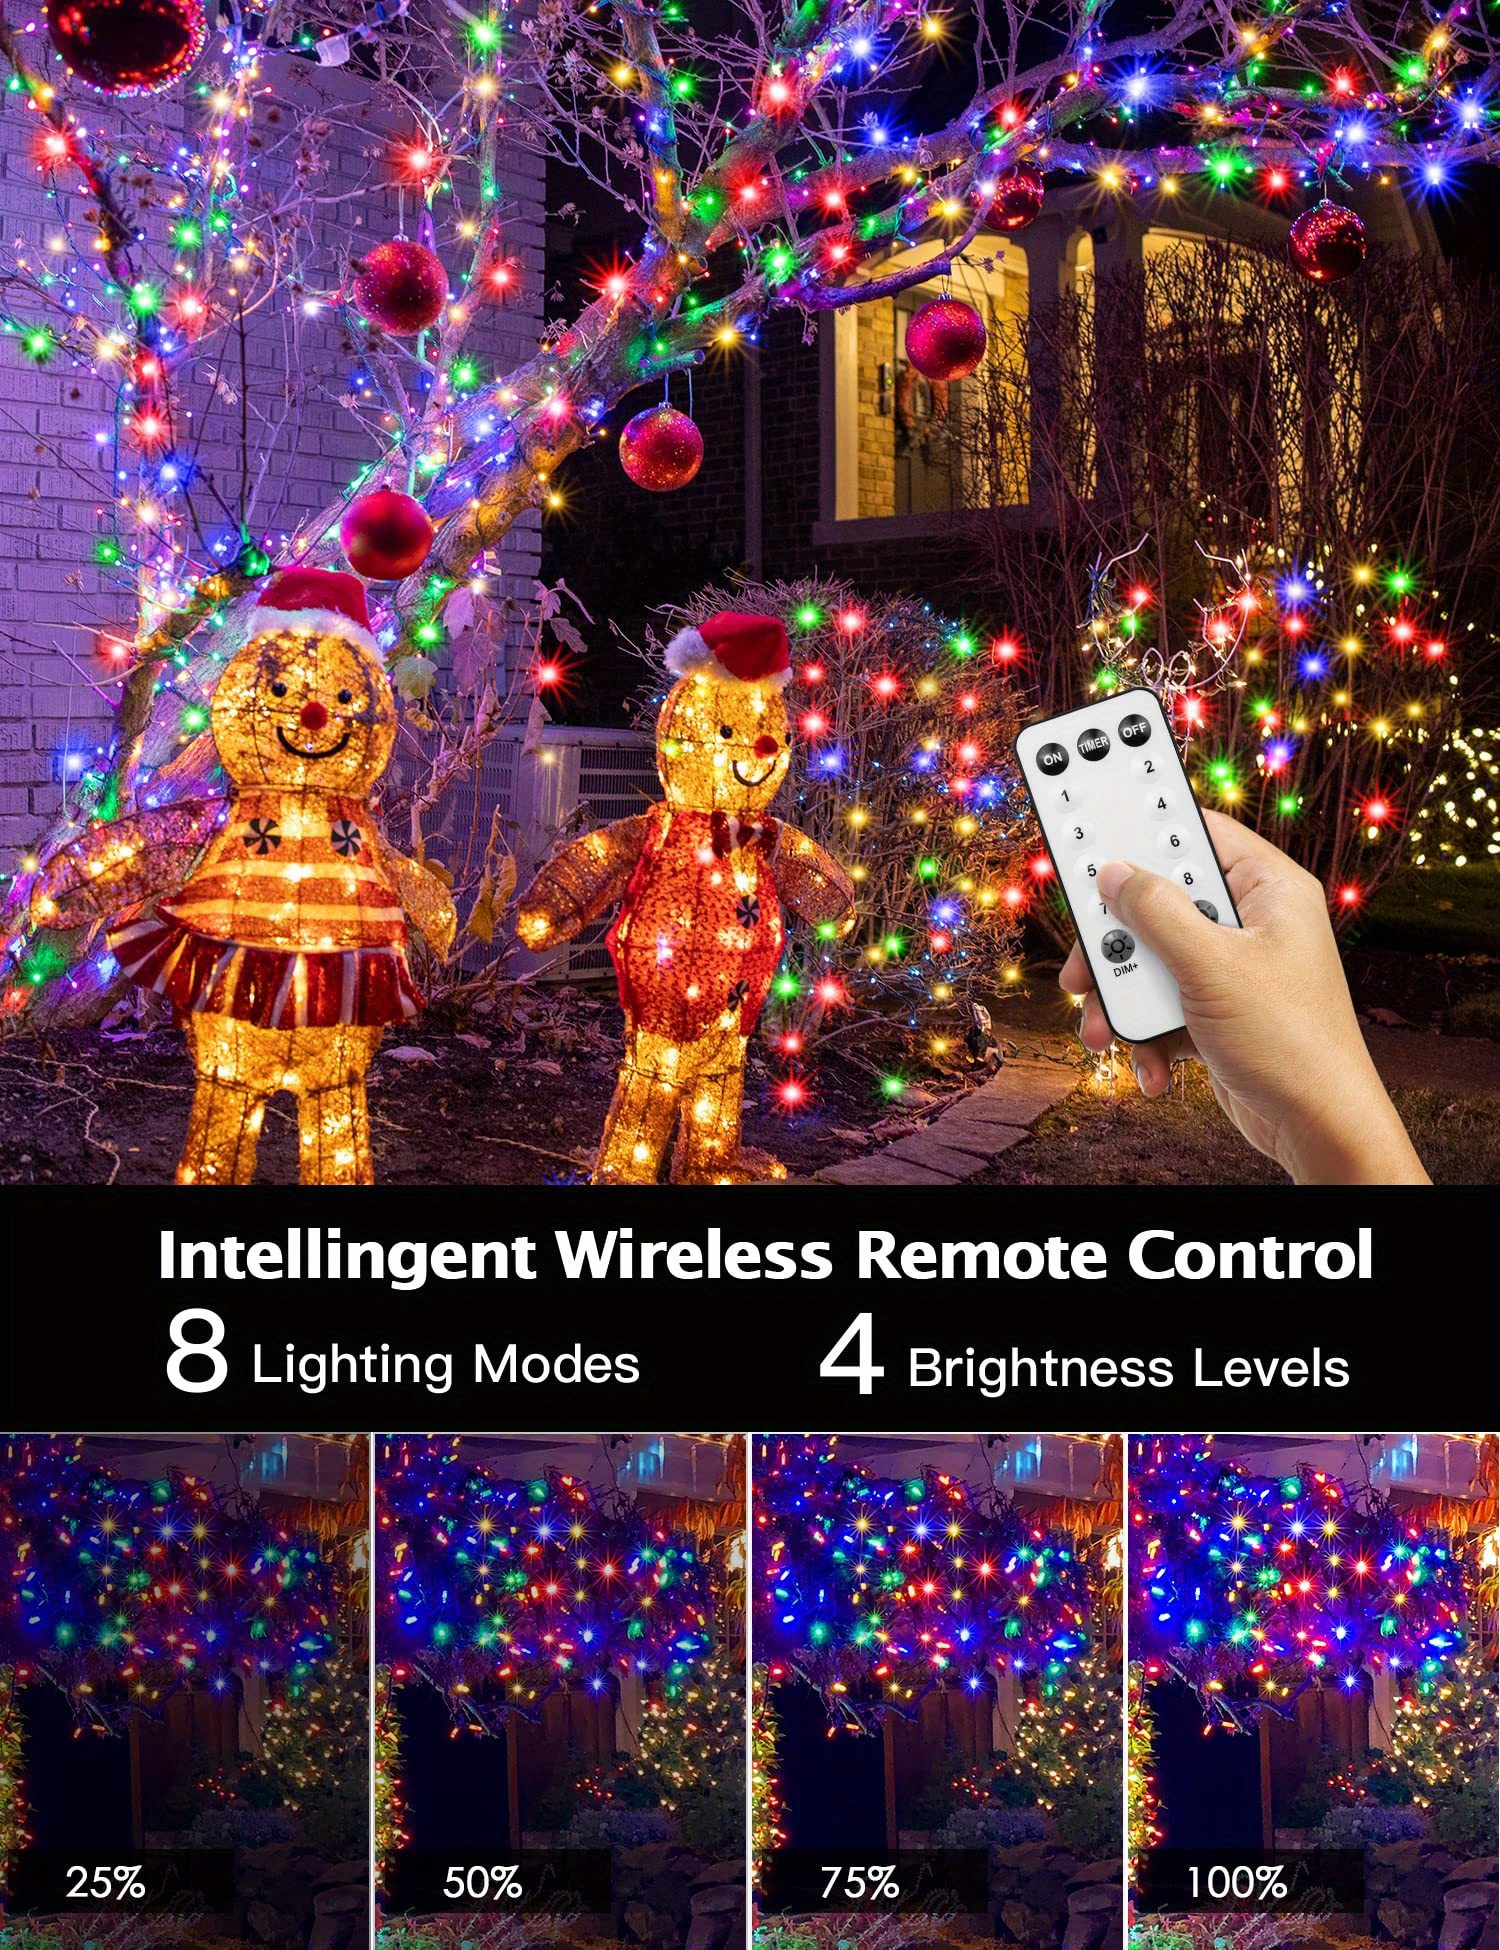 1 set 1000 led christmas lights 405ft outdoor string lights plug in fairy lights green wire with remote timer 8 lighting modes decorations lights for tree xmas indoor wedding garden multi colored warm white cool white details 6